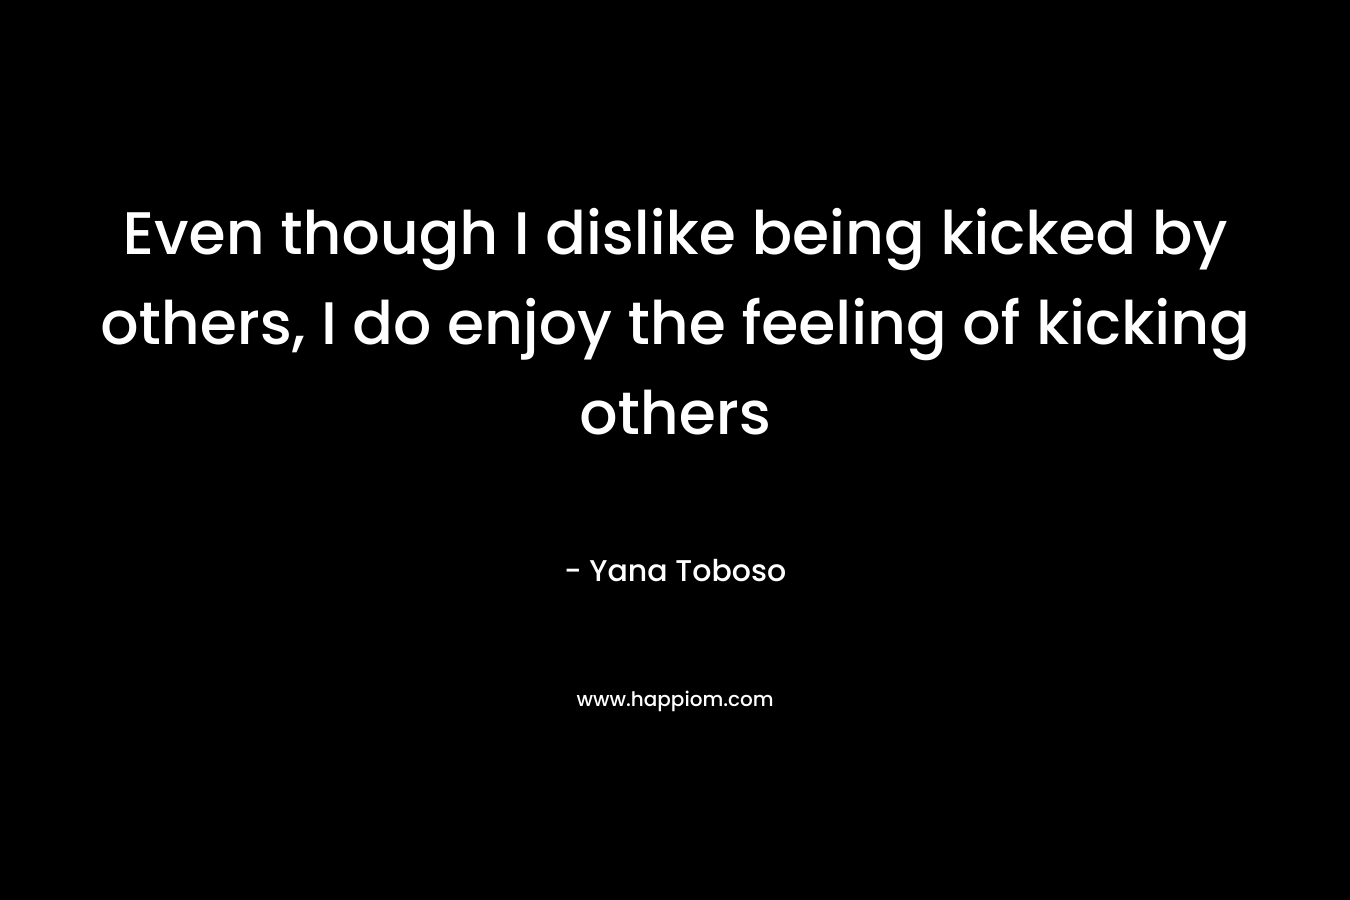 Even though I dislike being kicked by others, I do enjoy the feeling of kicking others